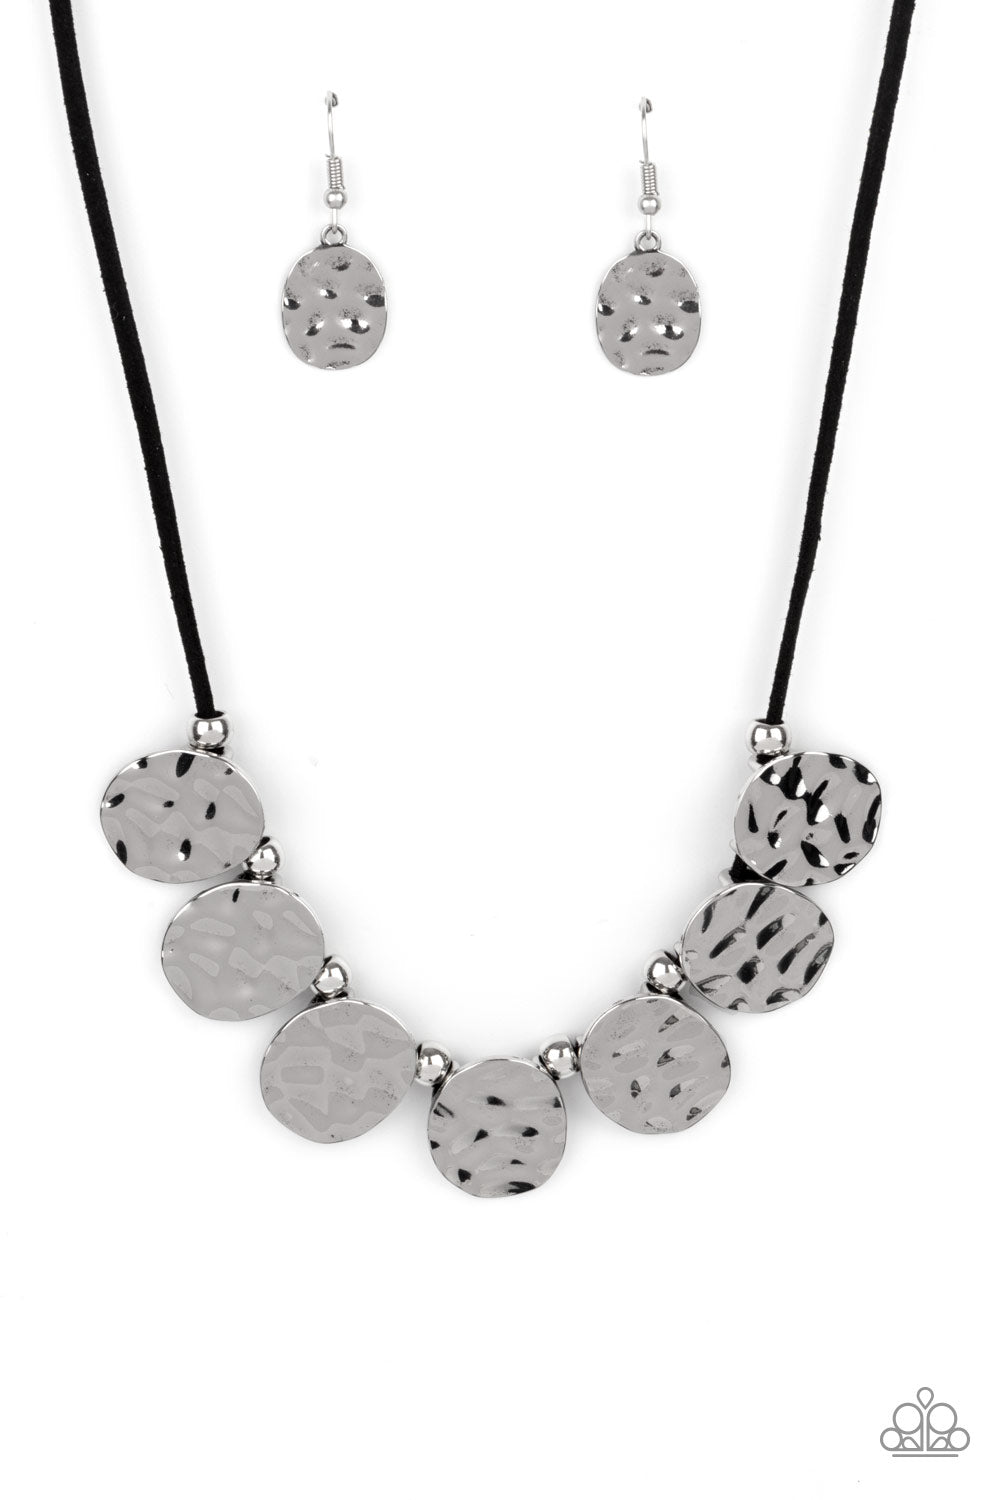 ** 0546 Paparazzi Accessories Turn Me Loose - Black Necklace